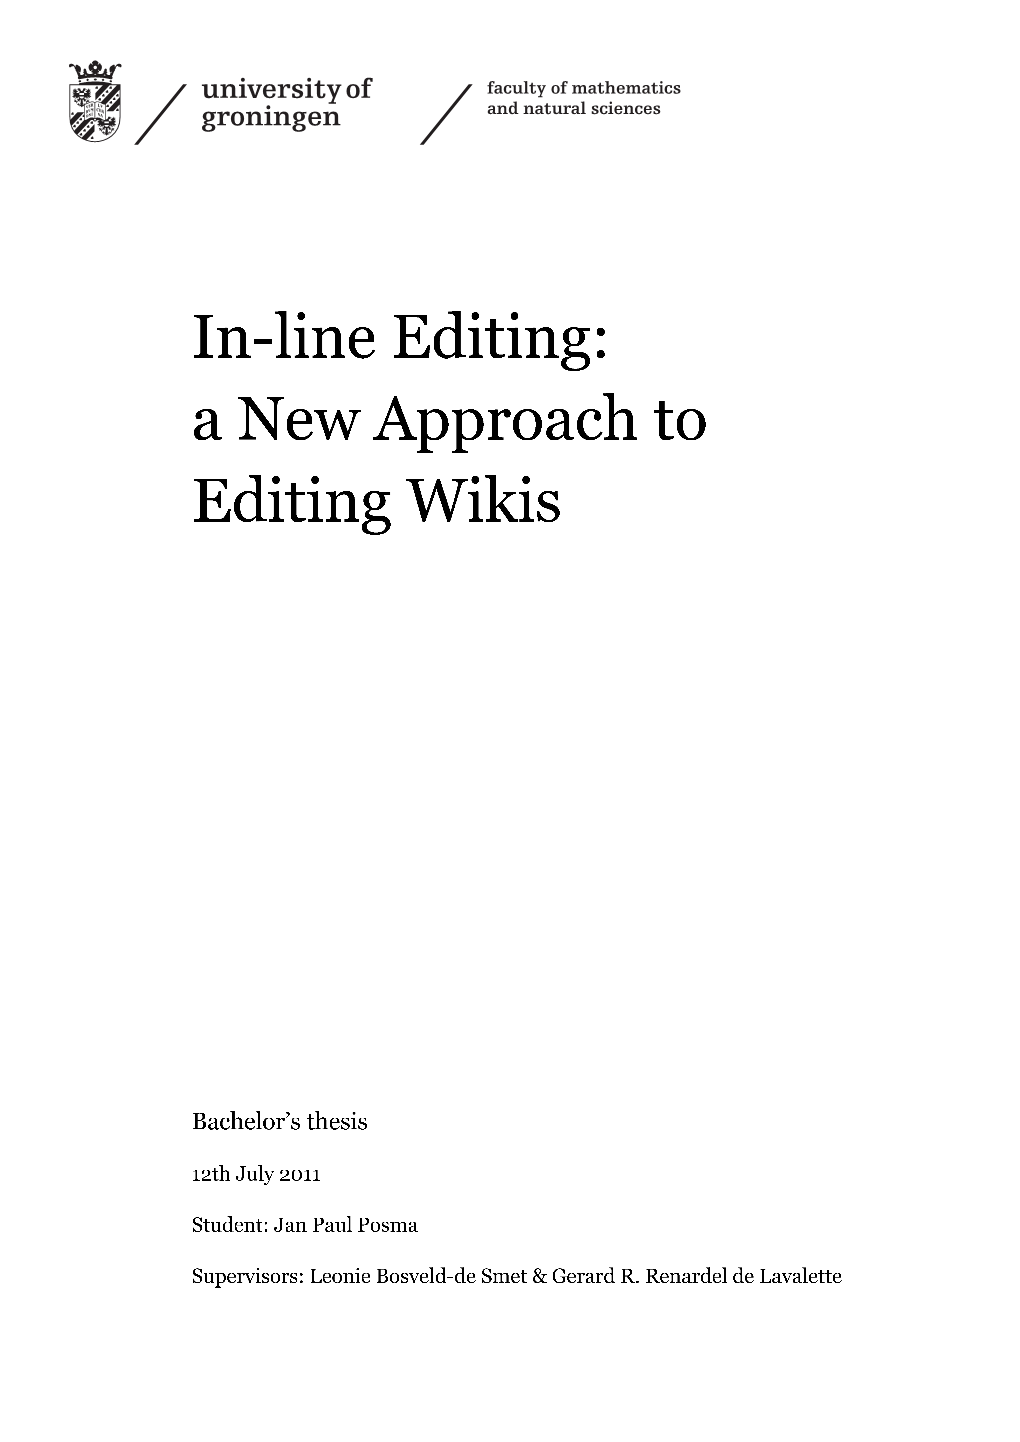 In-Line Editing: a New Approach to Editing Wikis